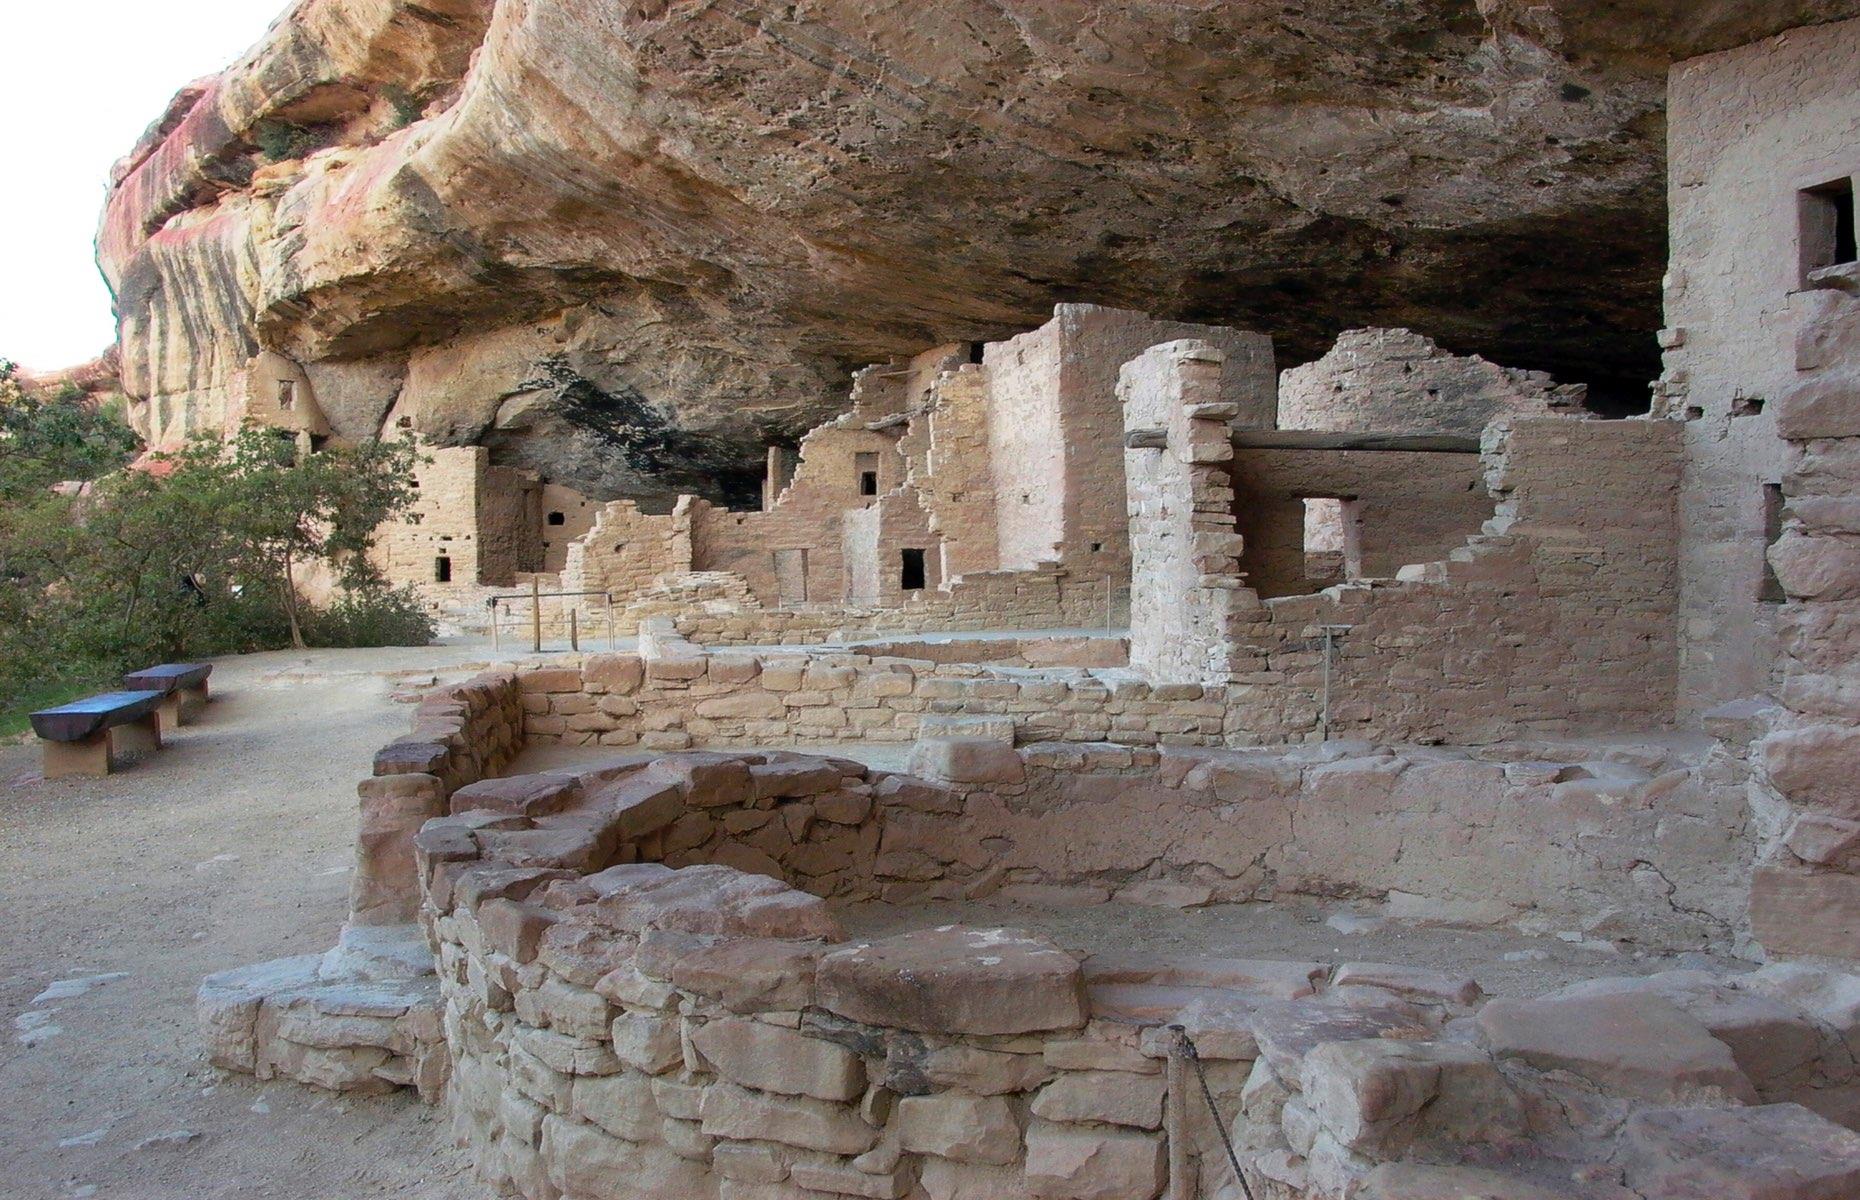 <p>After uncovering the huge Cliff Palace, Mason and Wetherill went on to discover other dwellings, which have since been named Spruce Tree House (pictured) and Square Tower House. Along with the Cliff Palace, these remain three of the more important cliff dwellings to visit in Mesa Verde National Park for their architectural significance.   </p>